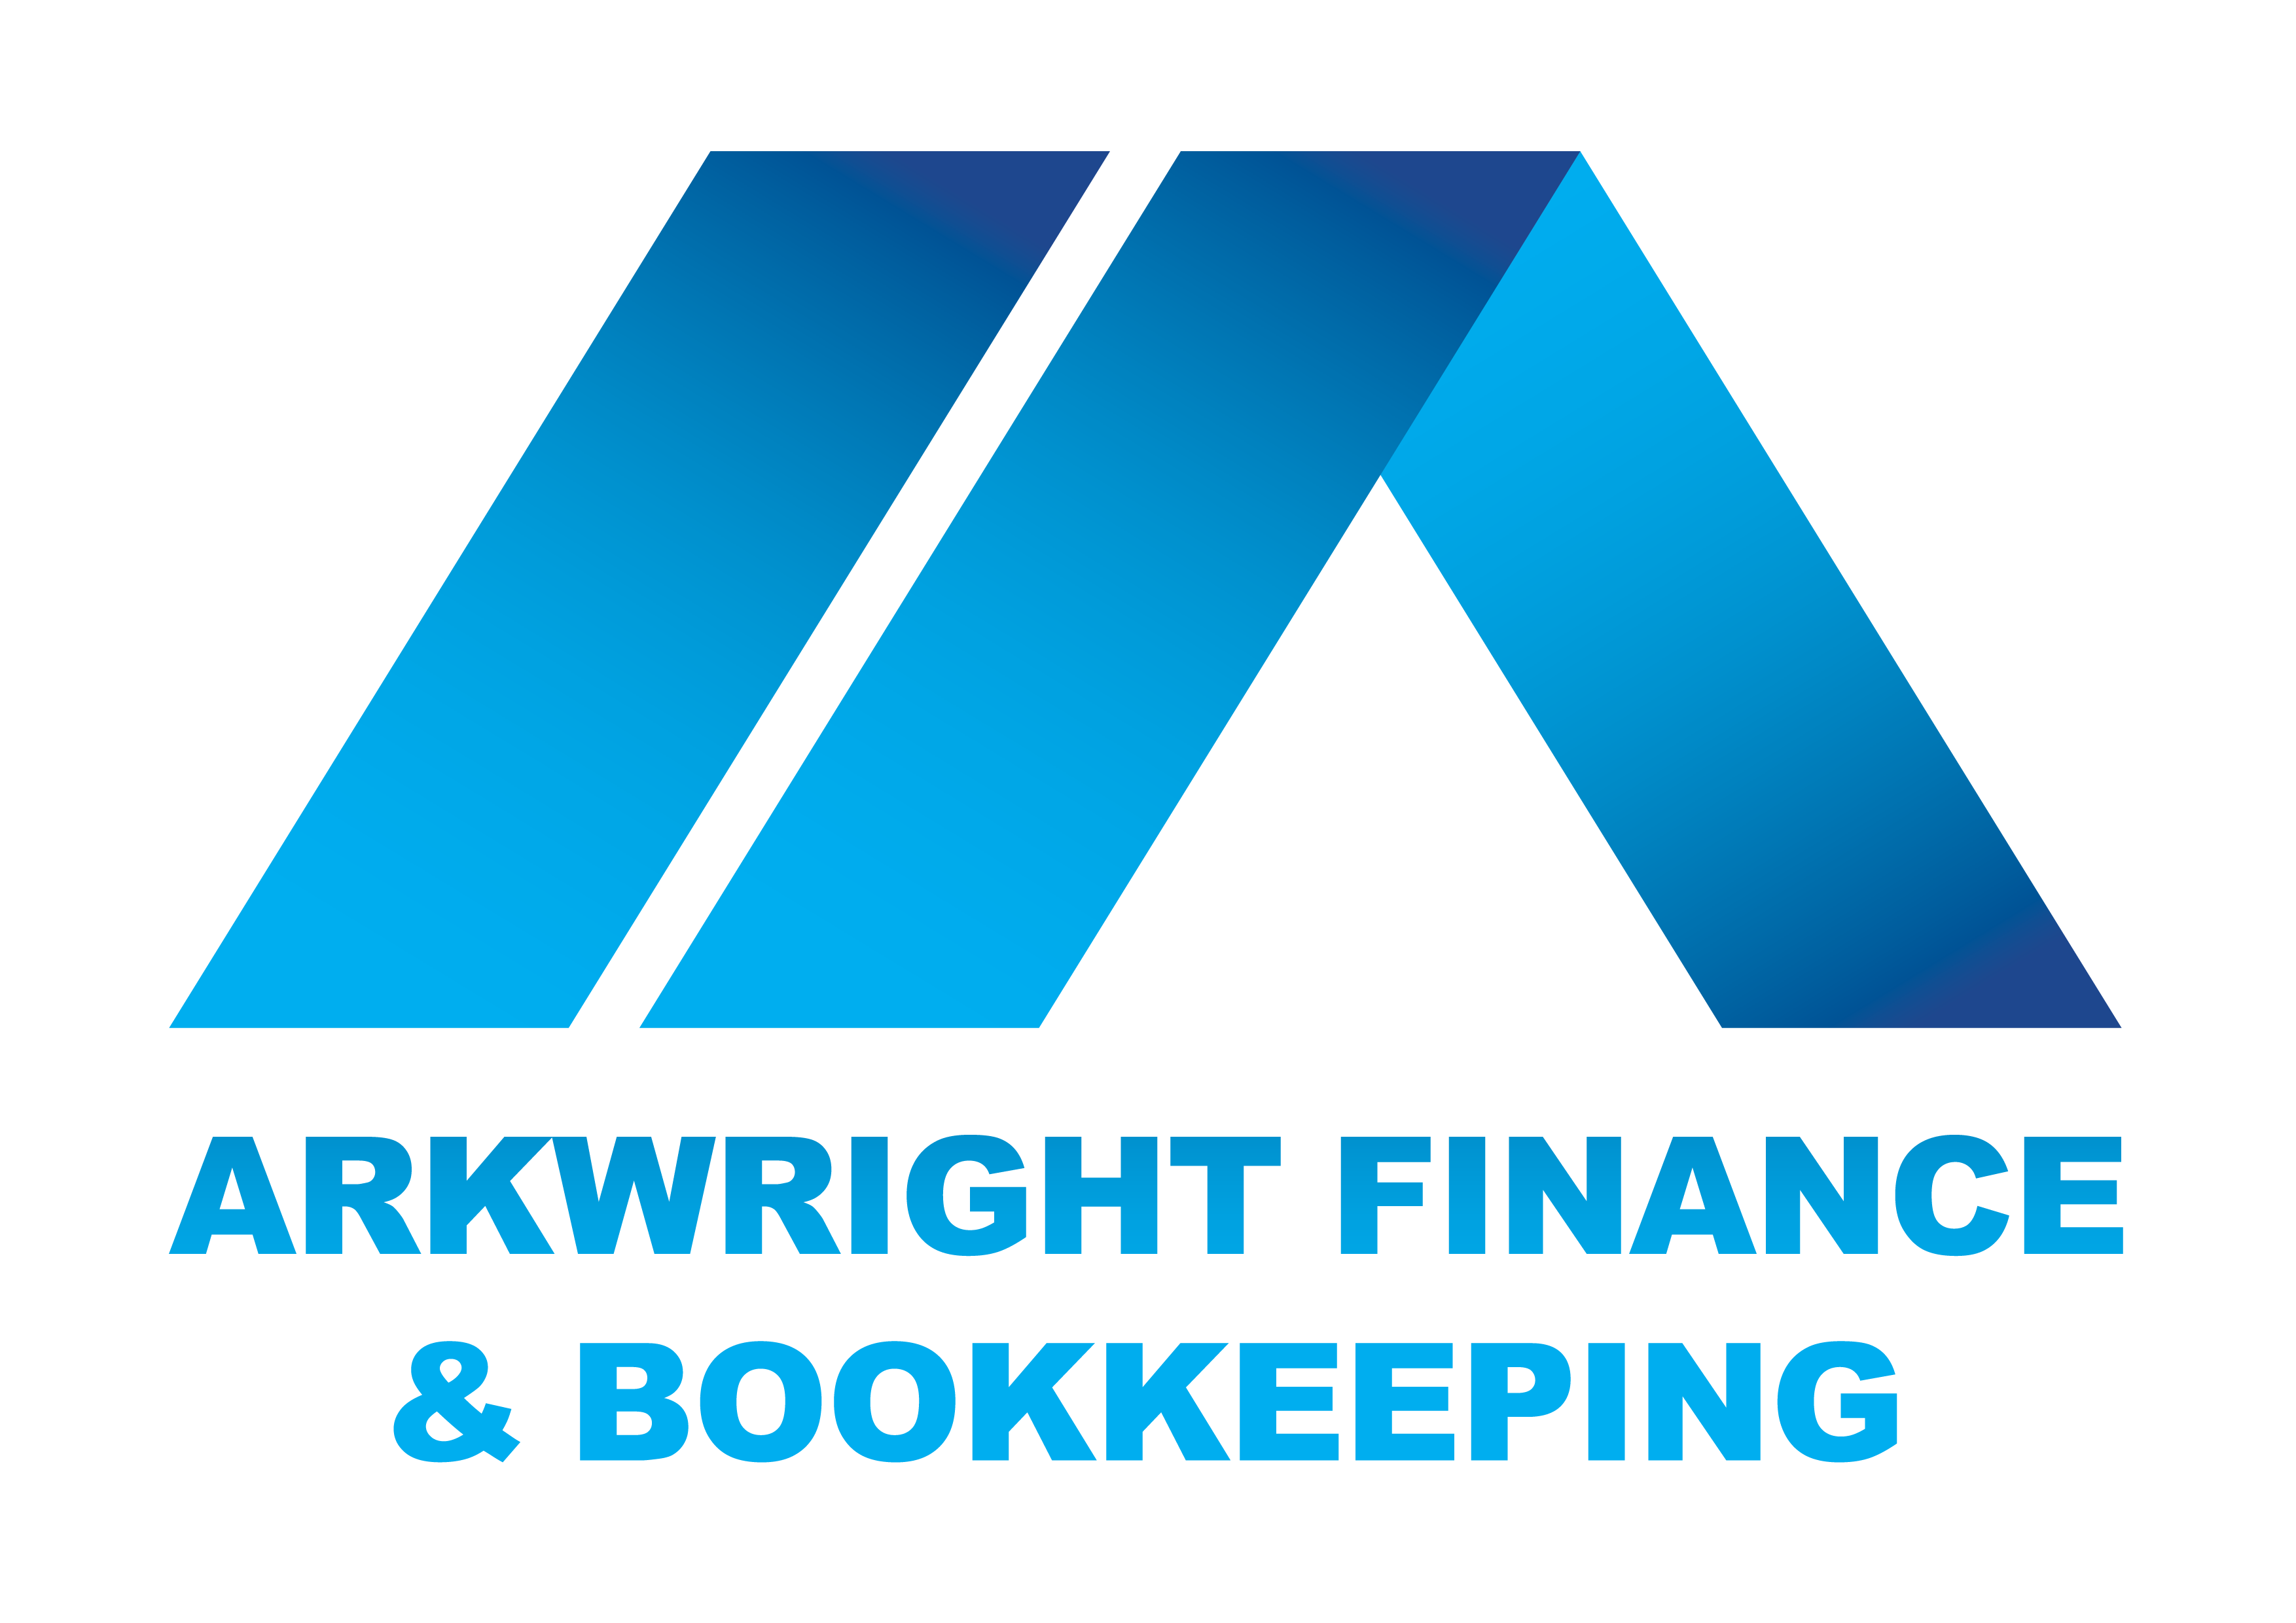 Arkwright Finance & Bookkeeping